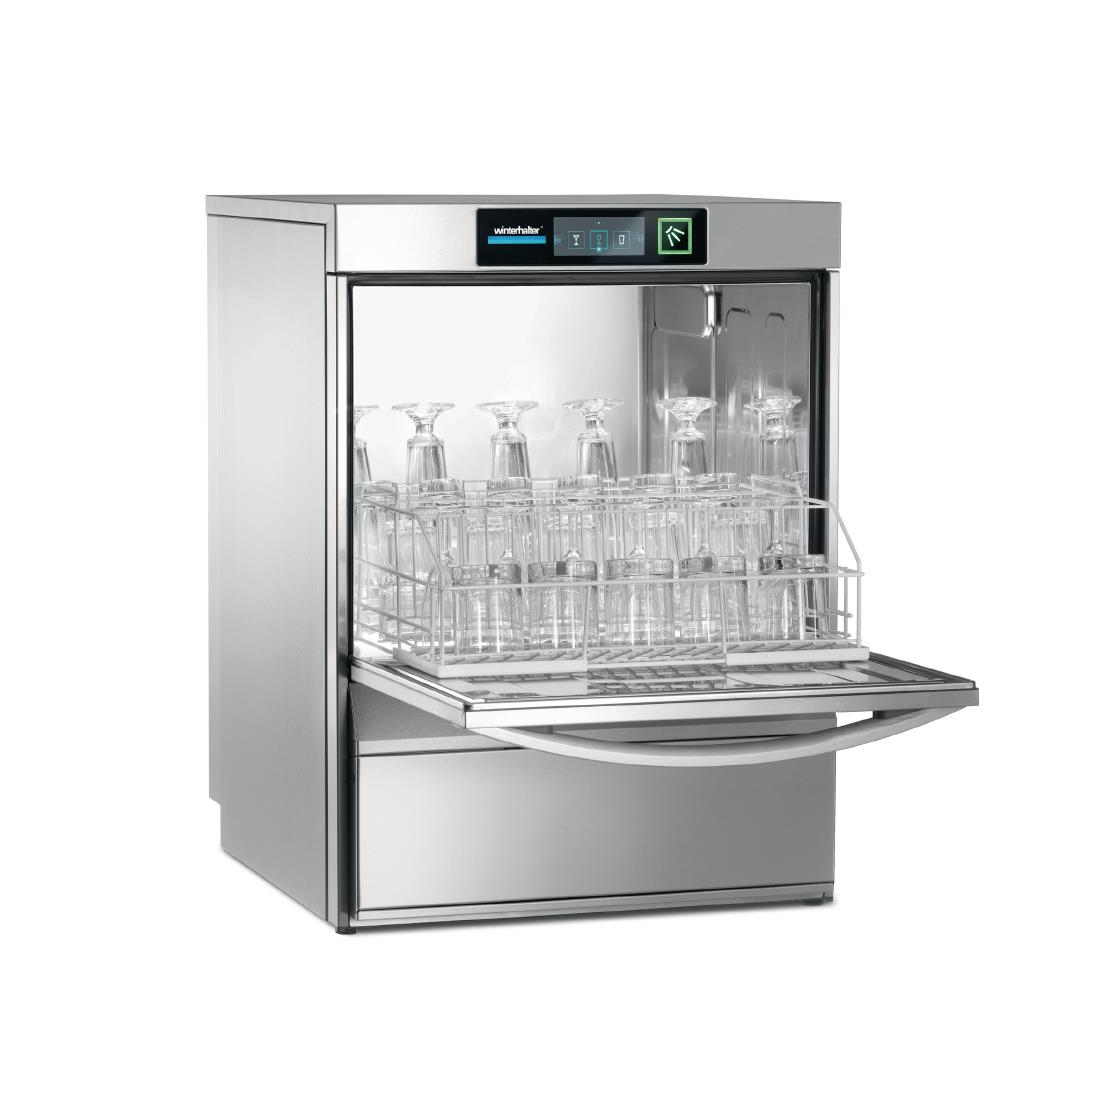 Winterhalter Undercounter Glasswasher UC-XL Cool Rinse with Install